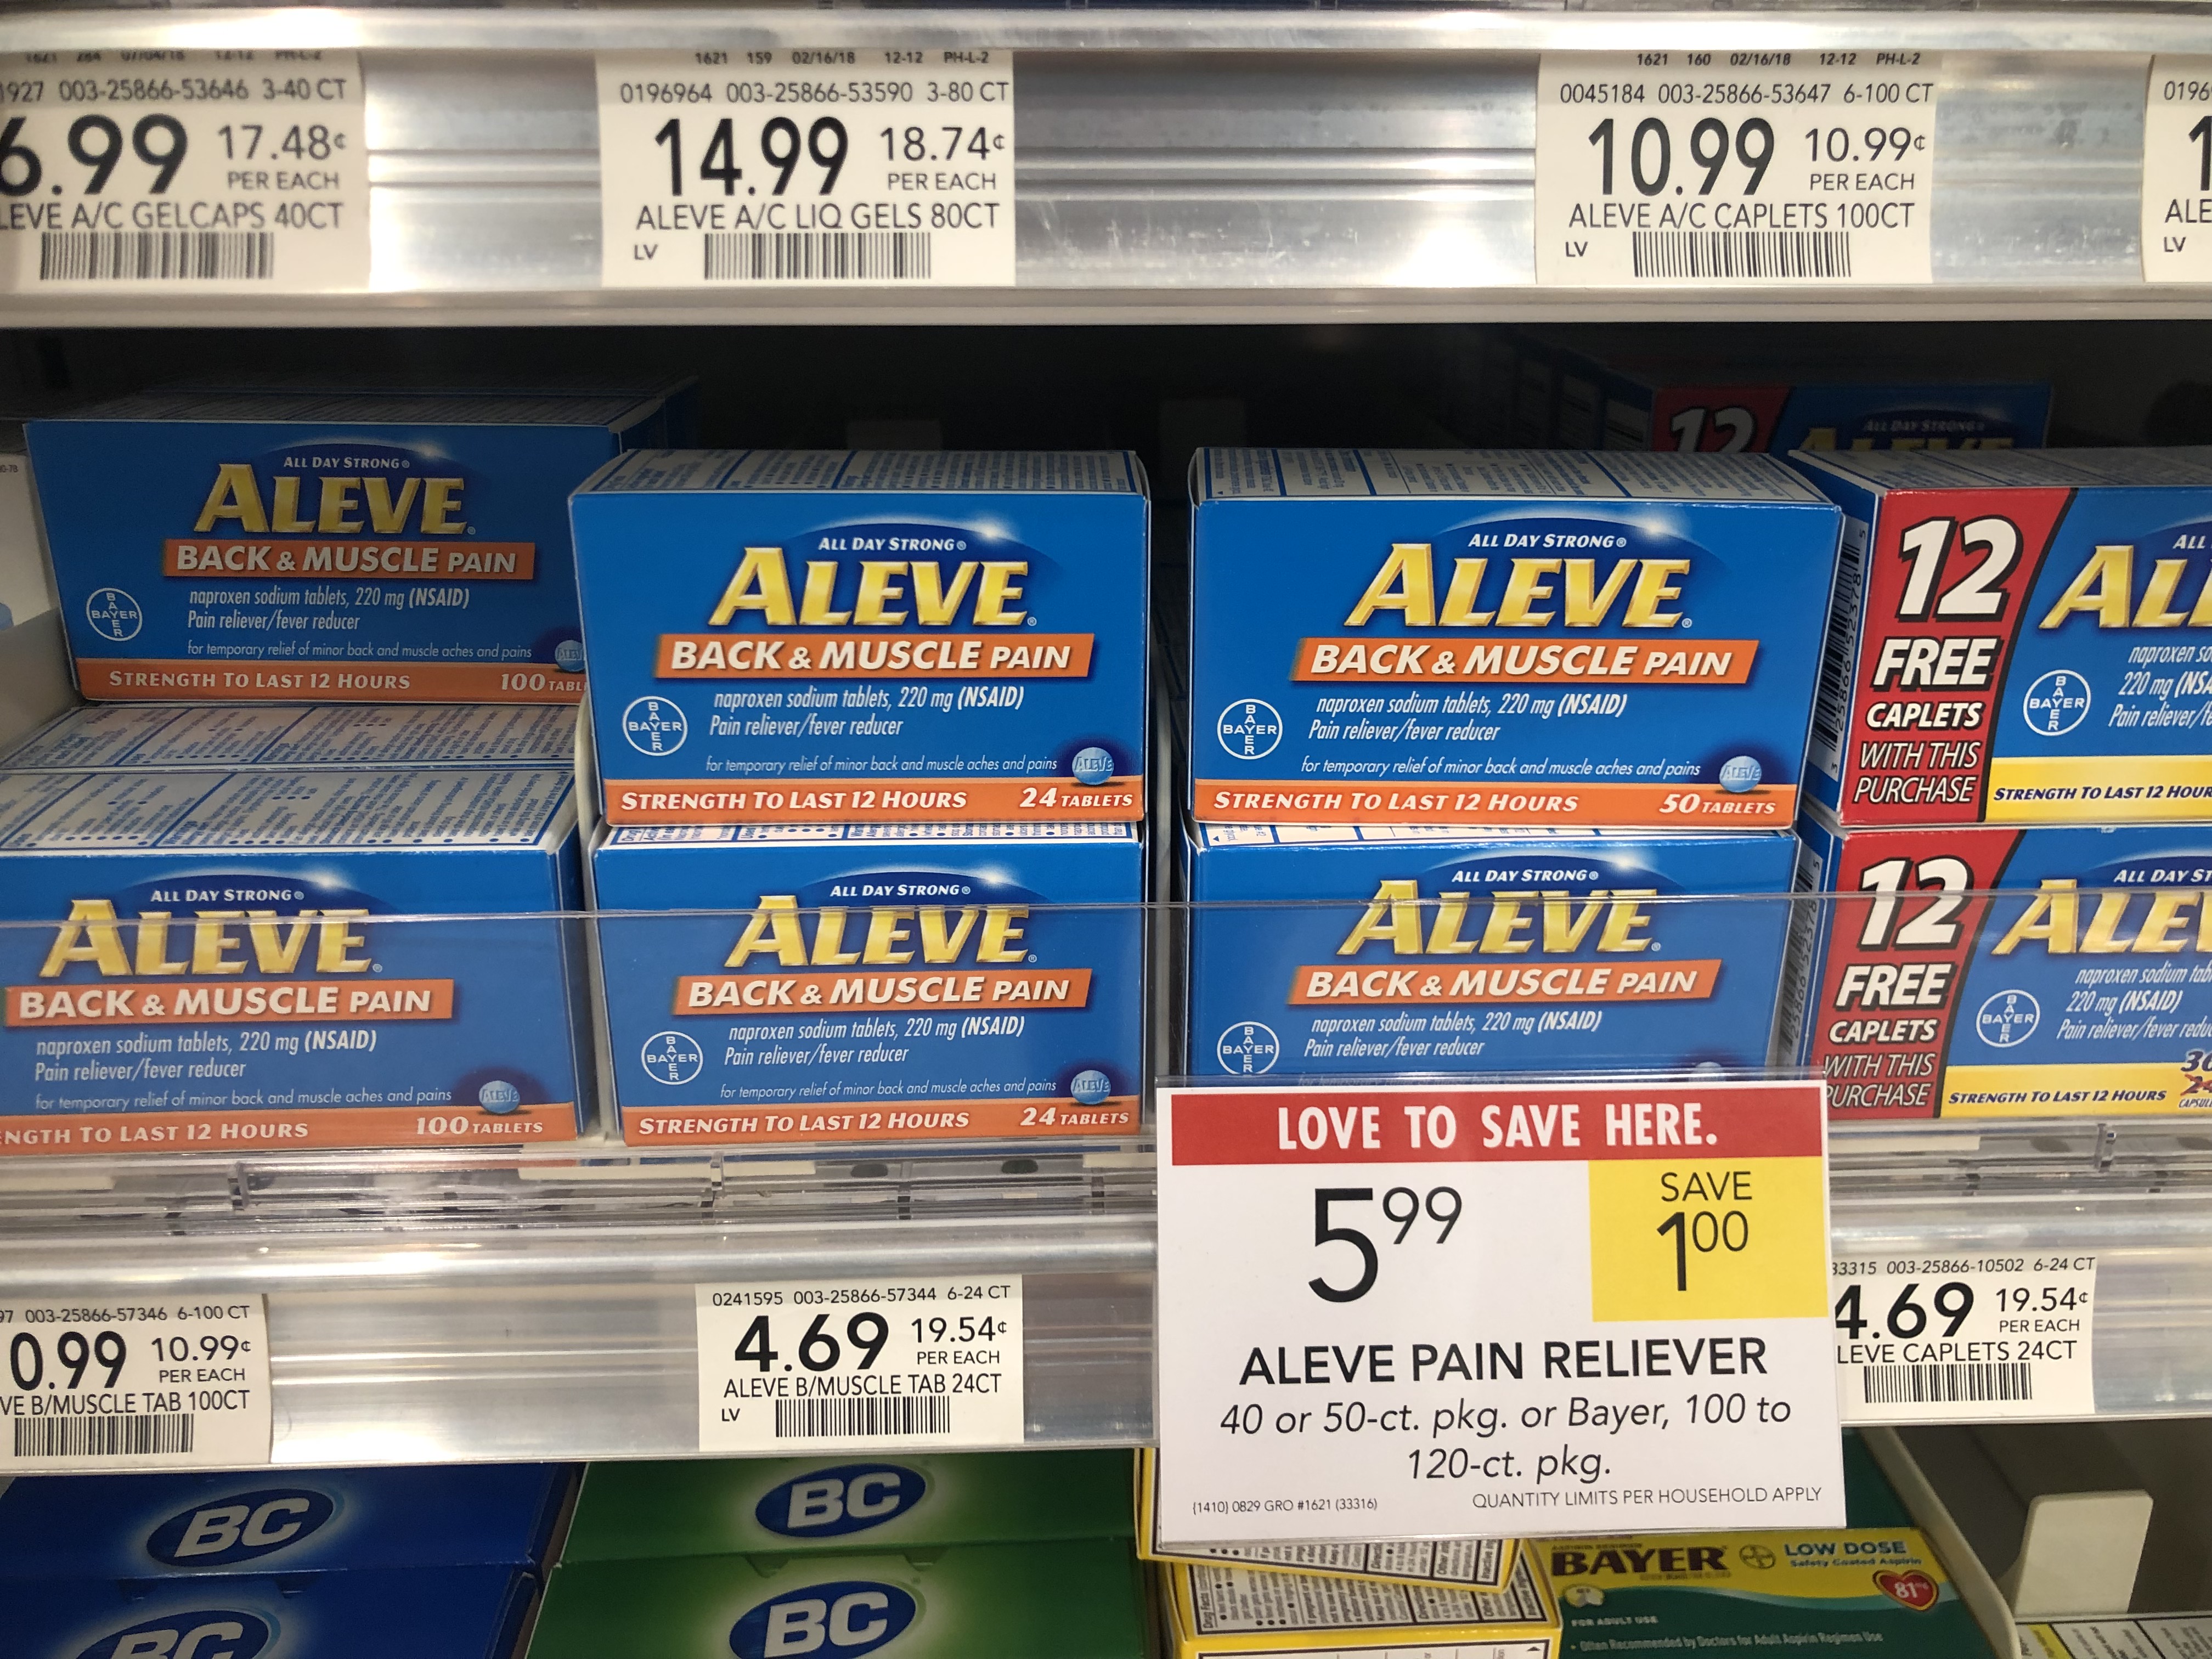 New Aleve Back & Muscle Pain Coupon - Bottles Just $1.69 At Publix